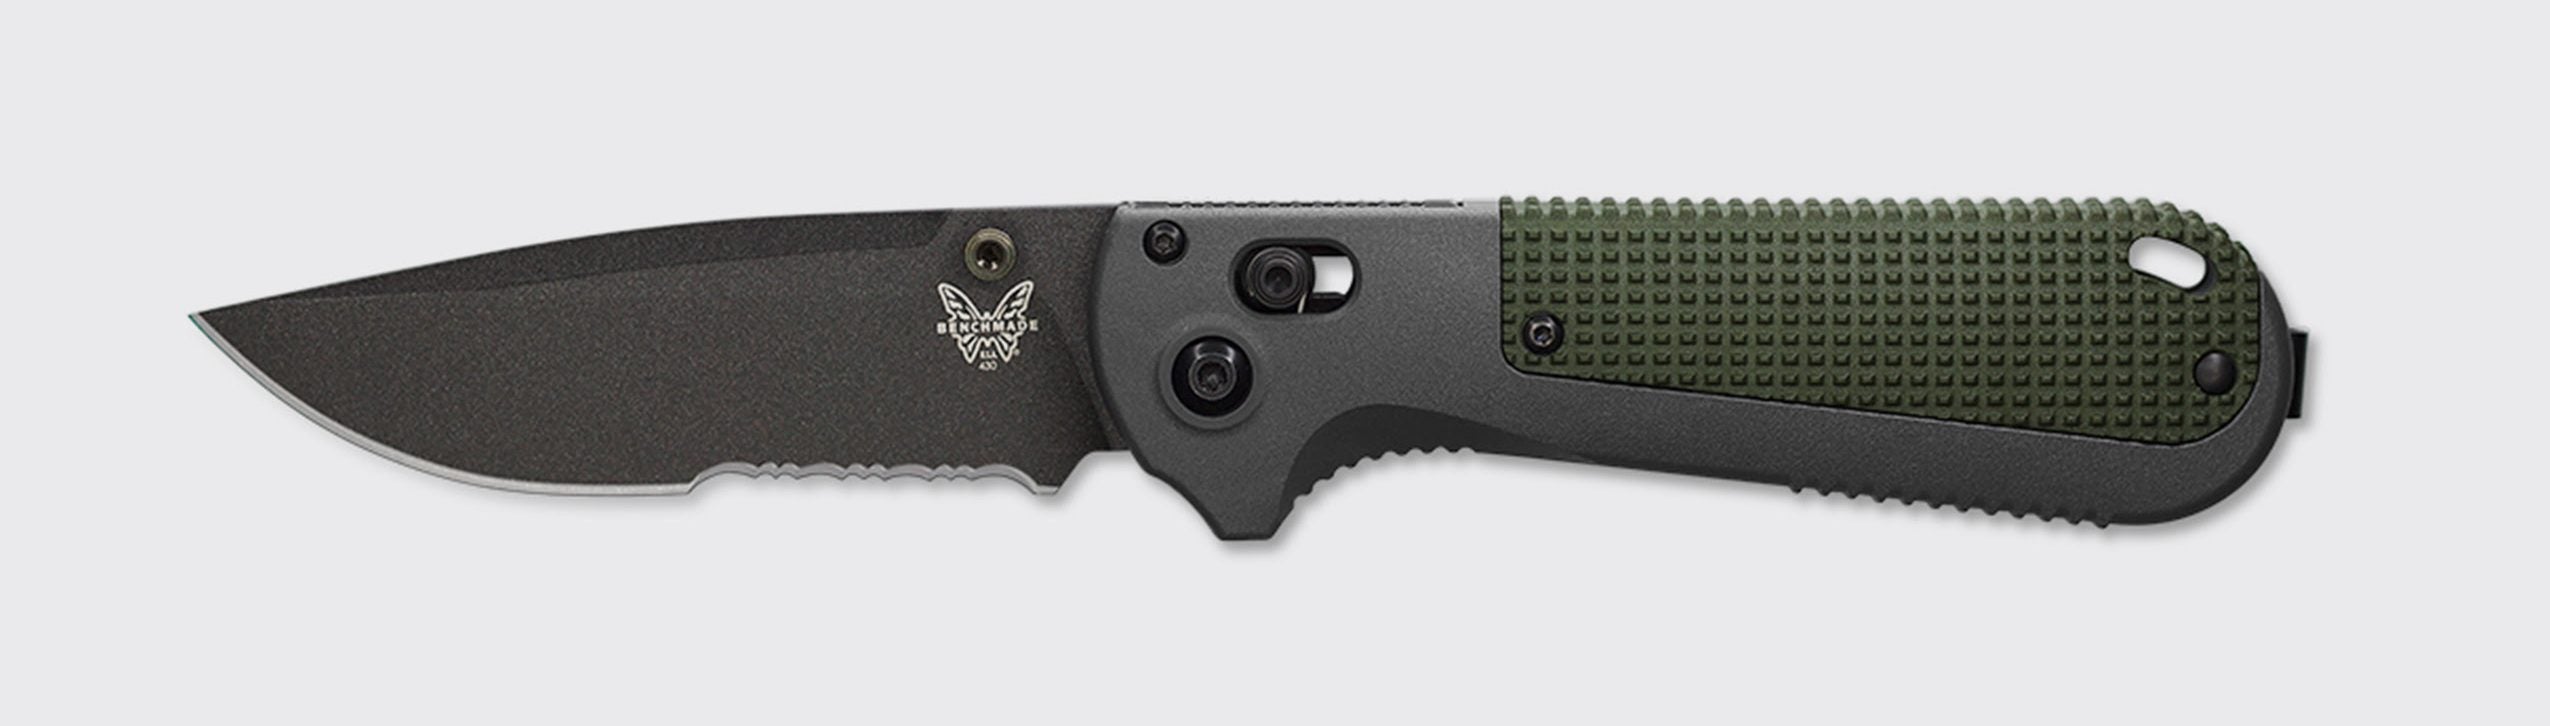 Introducing the 430BK and 430SBK Redoubt EDC Benchmade Knives